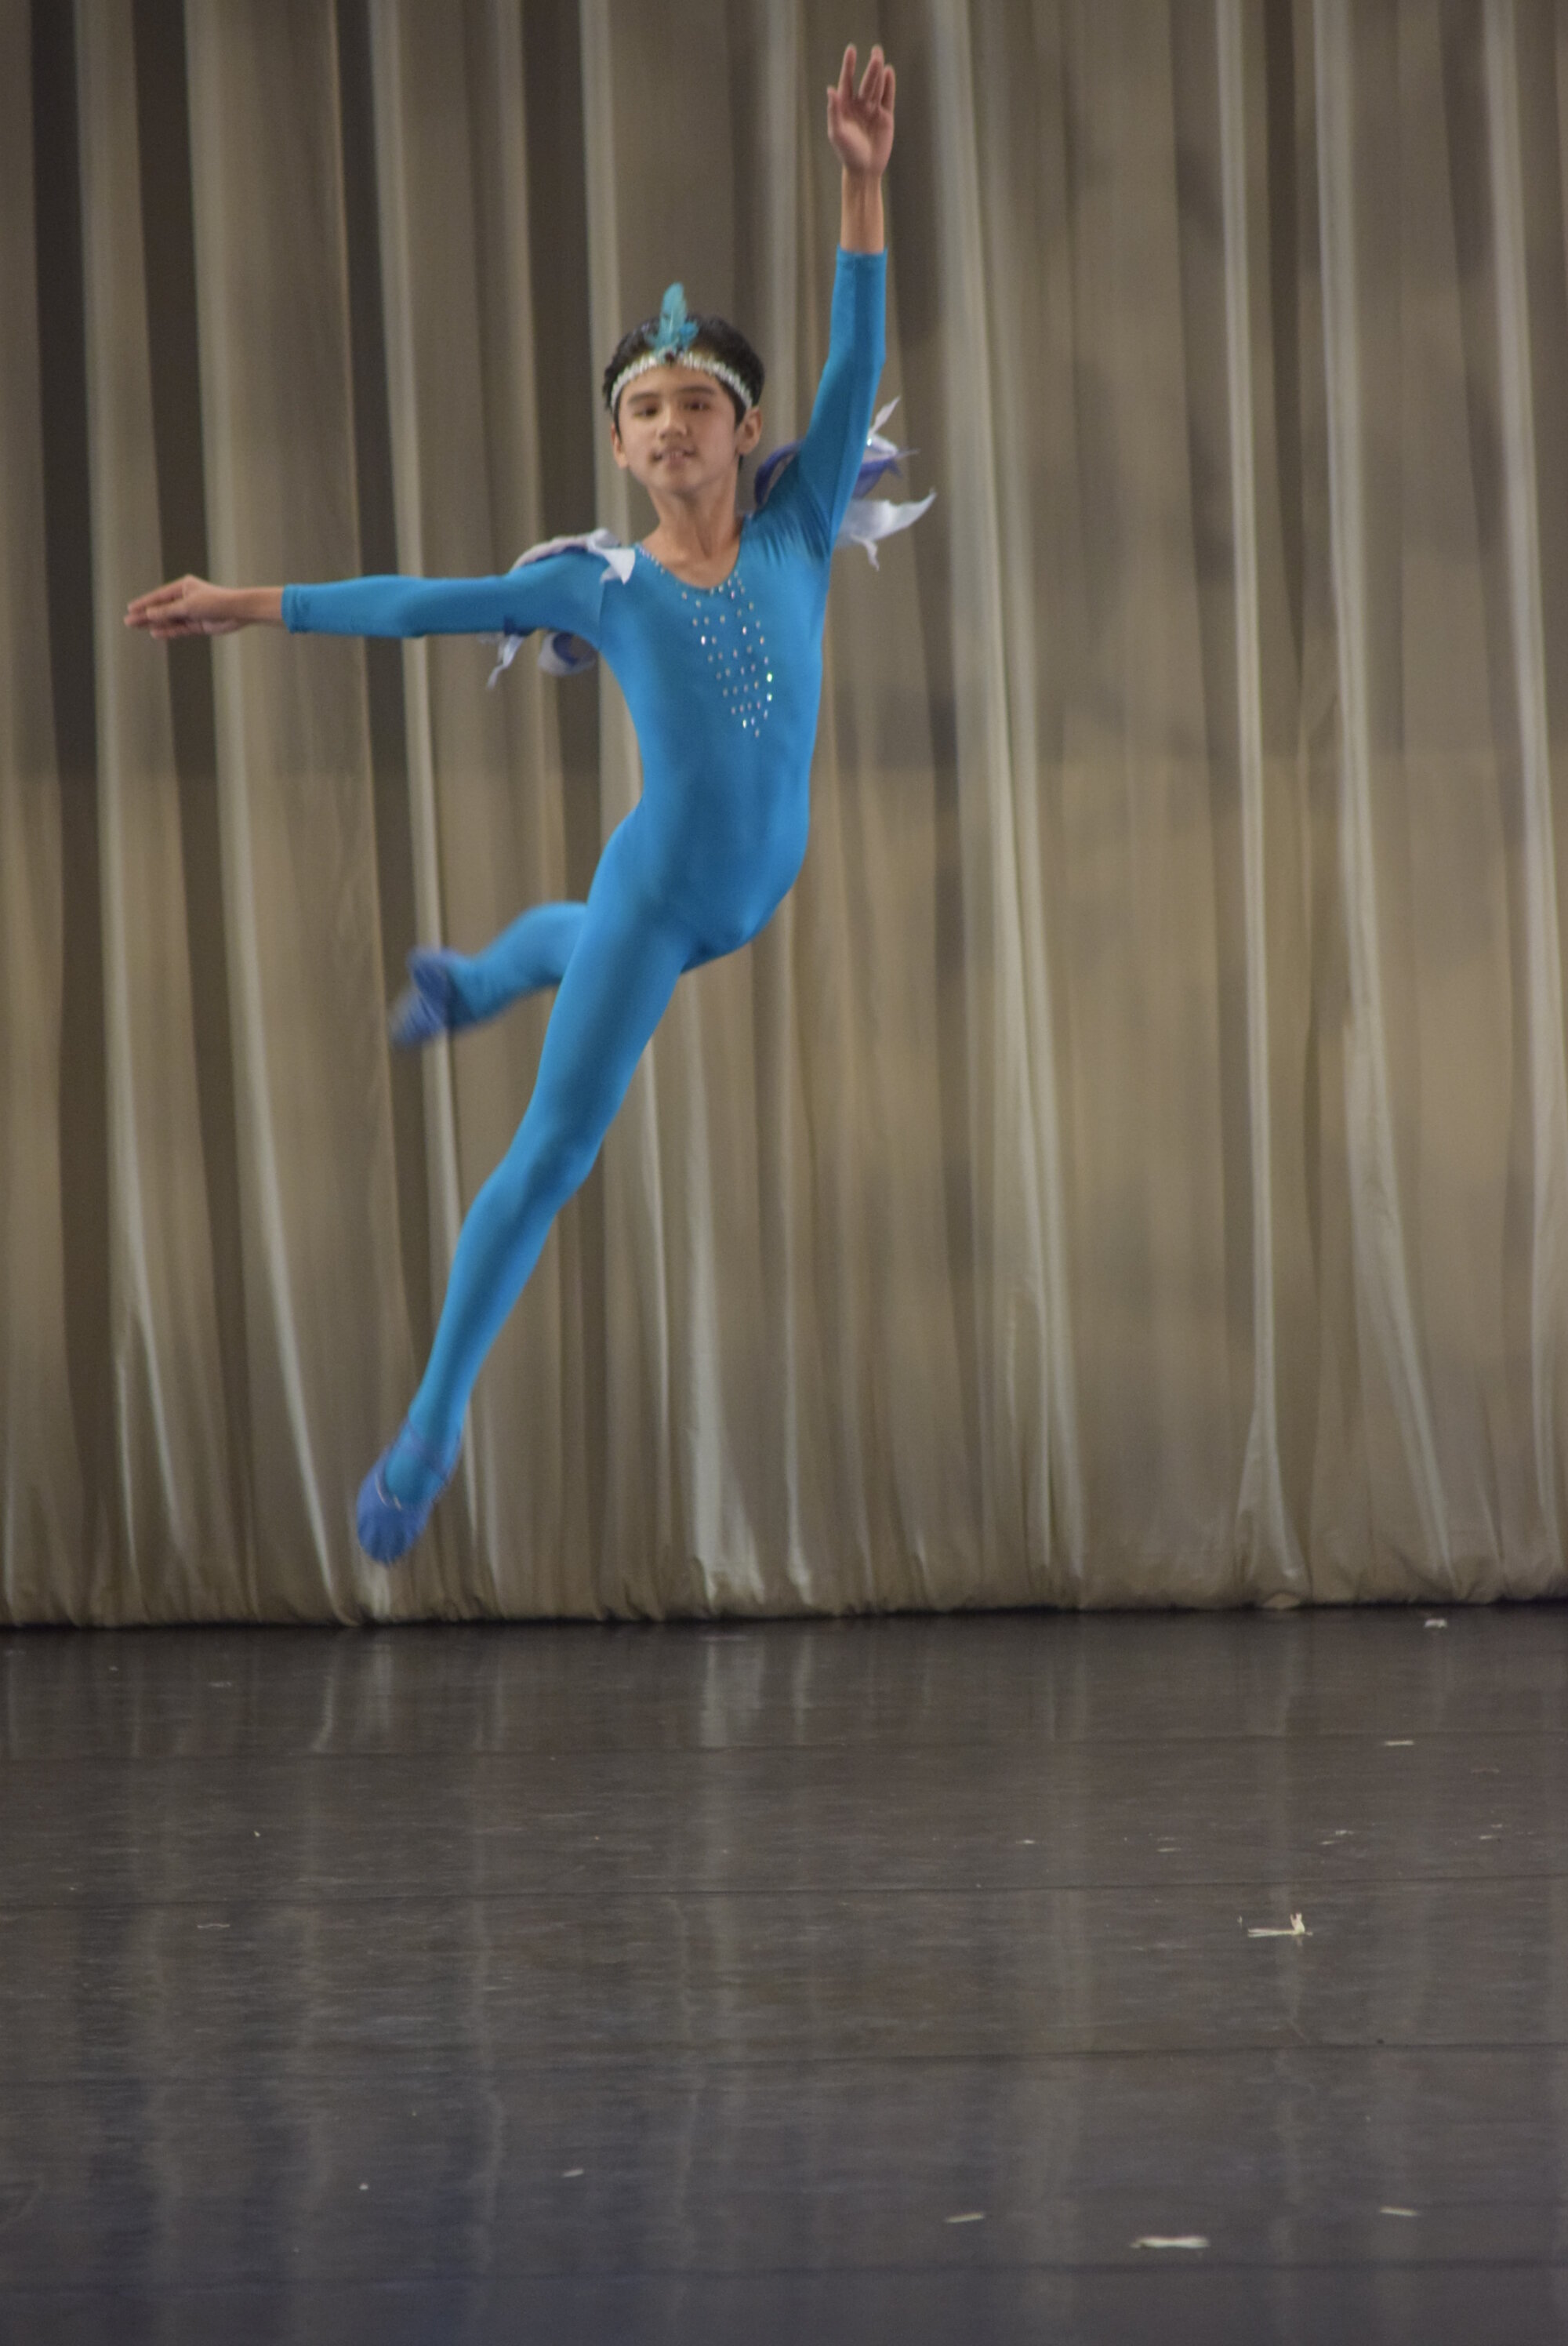    Juan Angelo De Leon achieves lift-off in the  Blue Bird Variation  from  The Sleeping Beauty  – in a blue costume, but of course! After performing the variation in  Tuloy ang Sayaw-an , a ballet fundraiser in July 2019 (above), Angelo danced it as